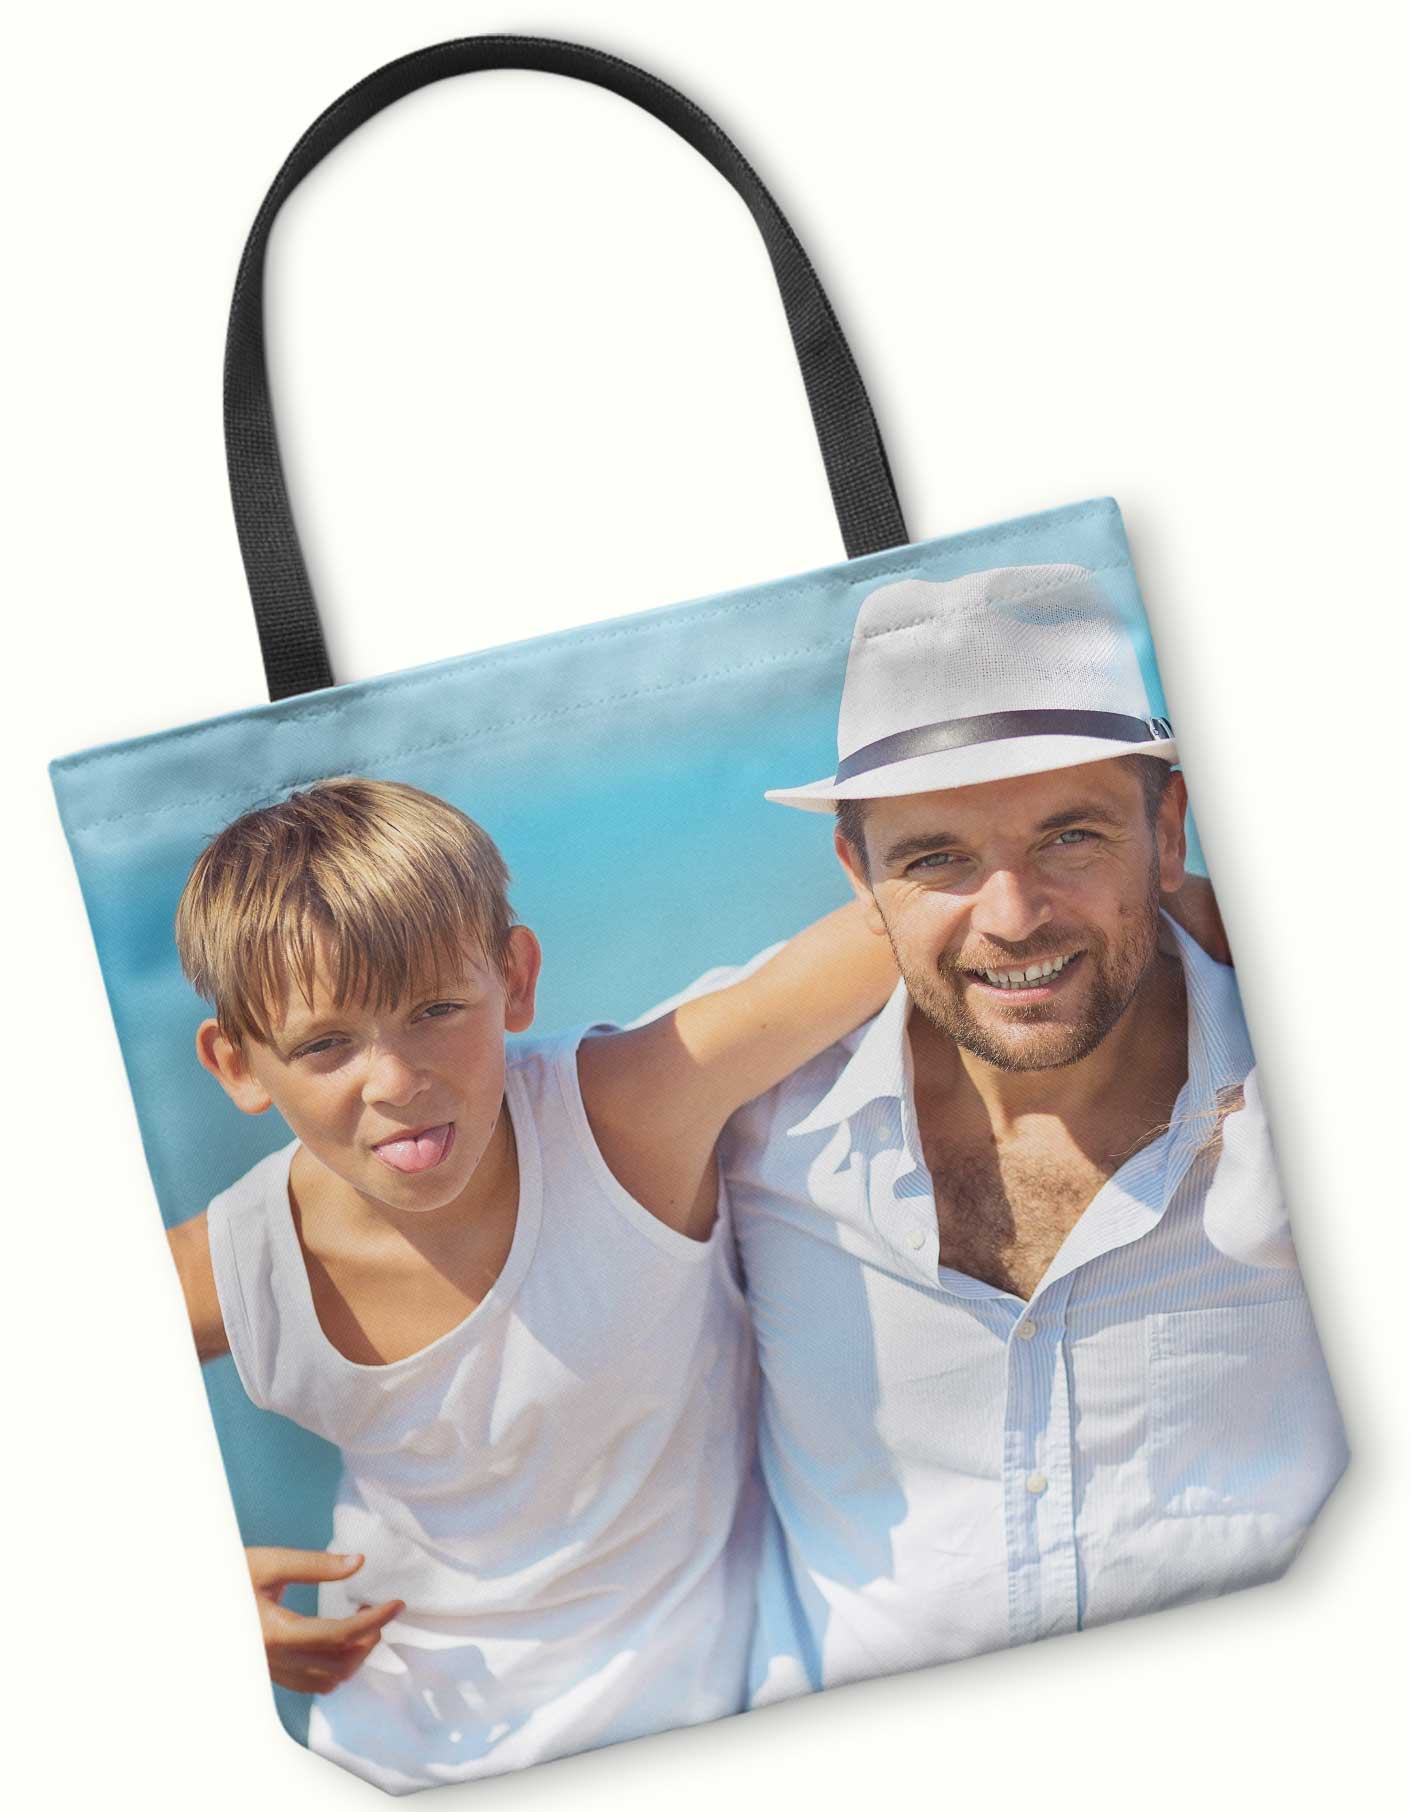 Custom Printed Tote Bag | It's Easy To Design Yours Today!